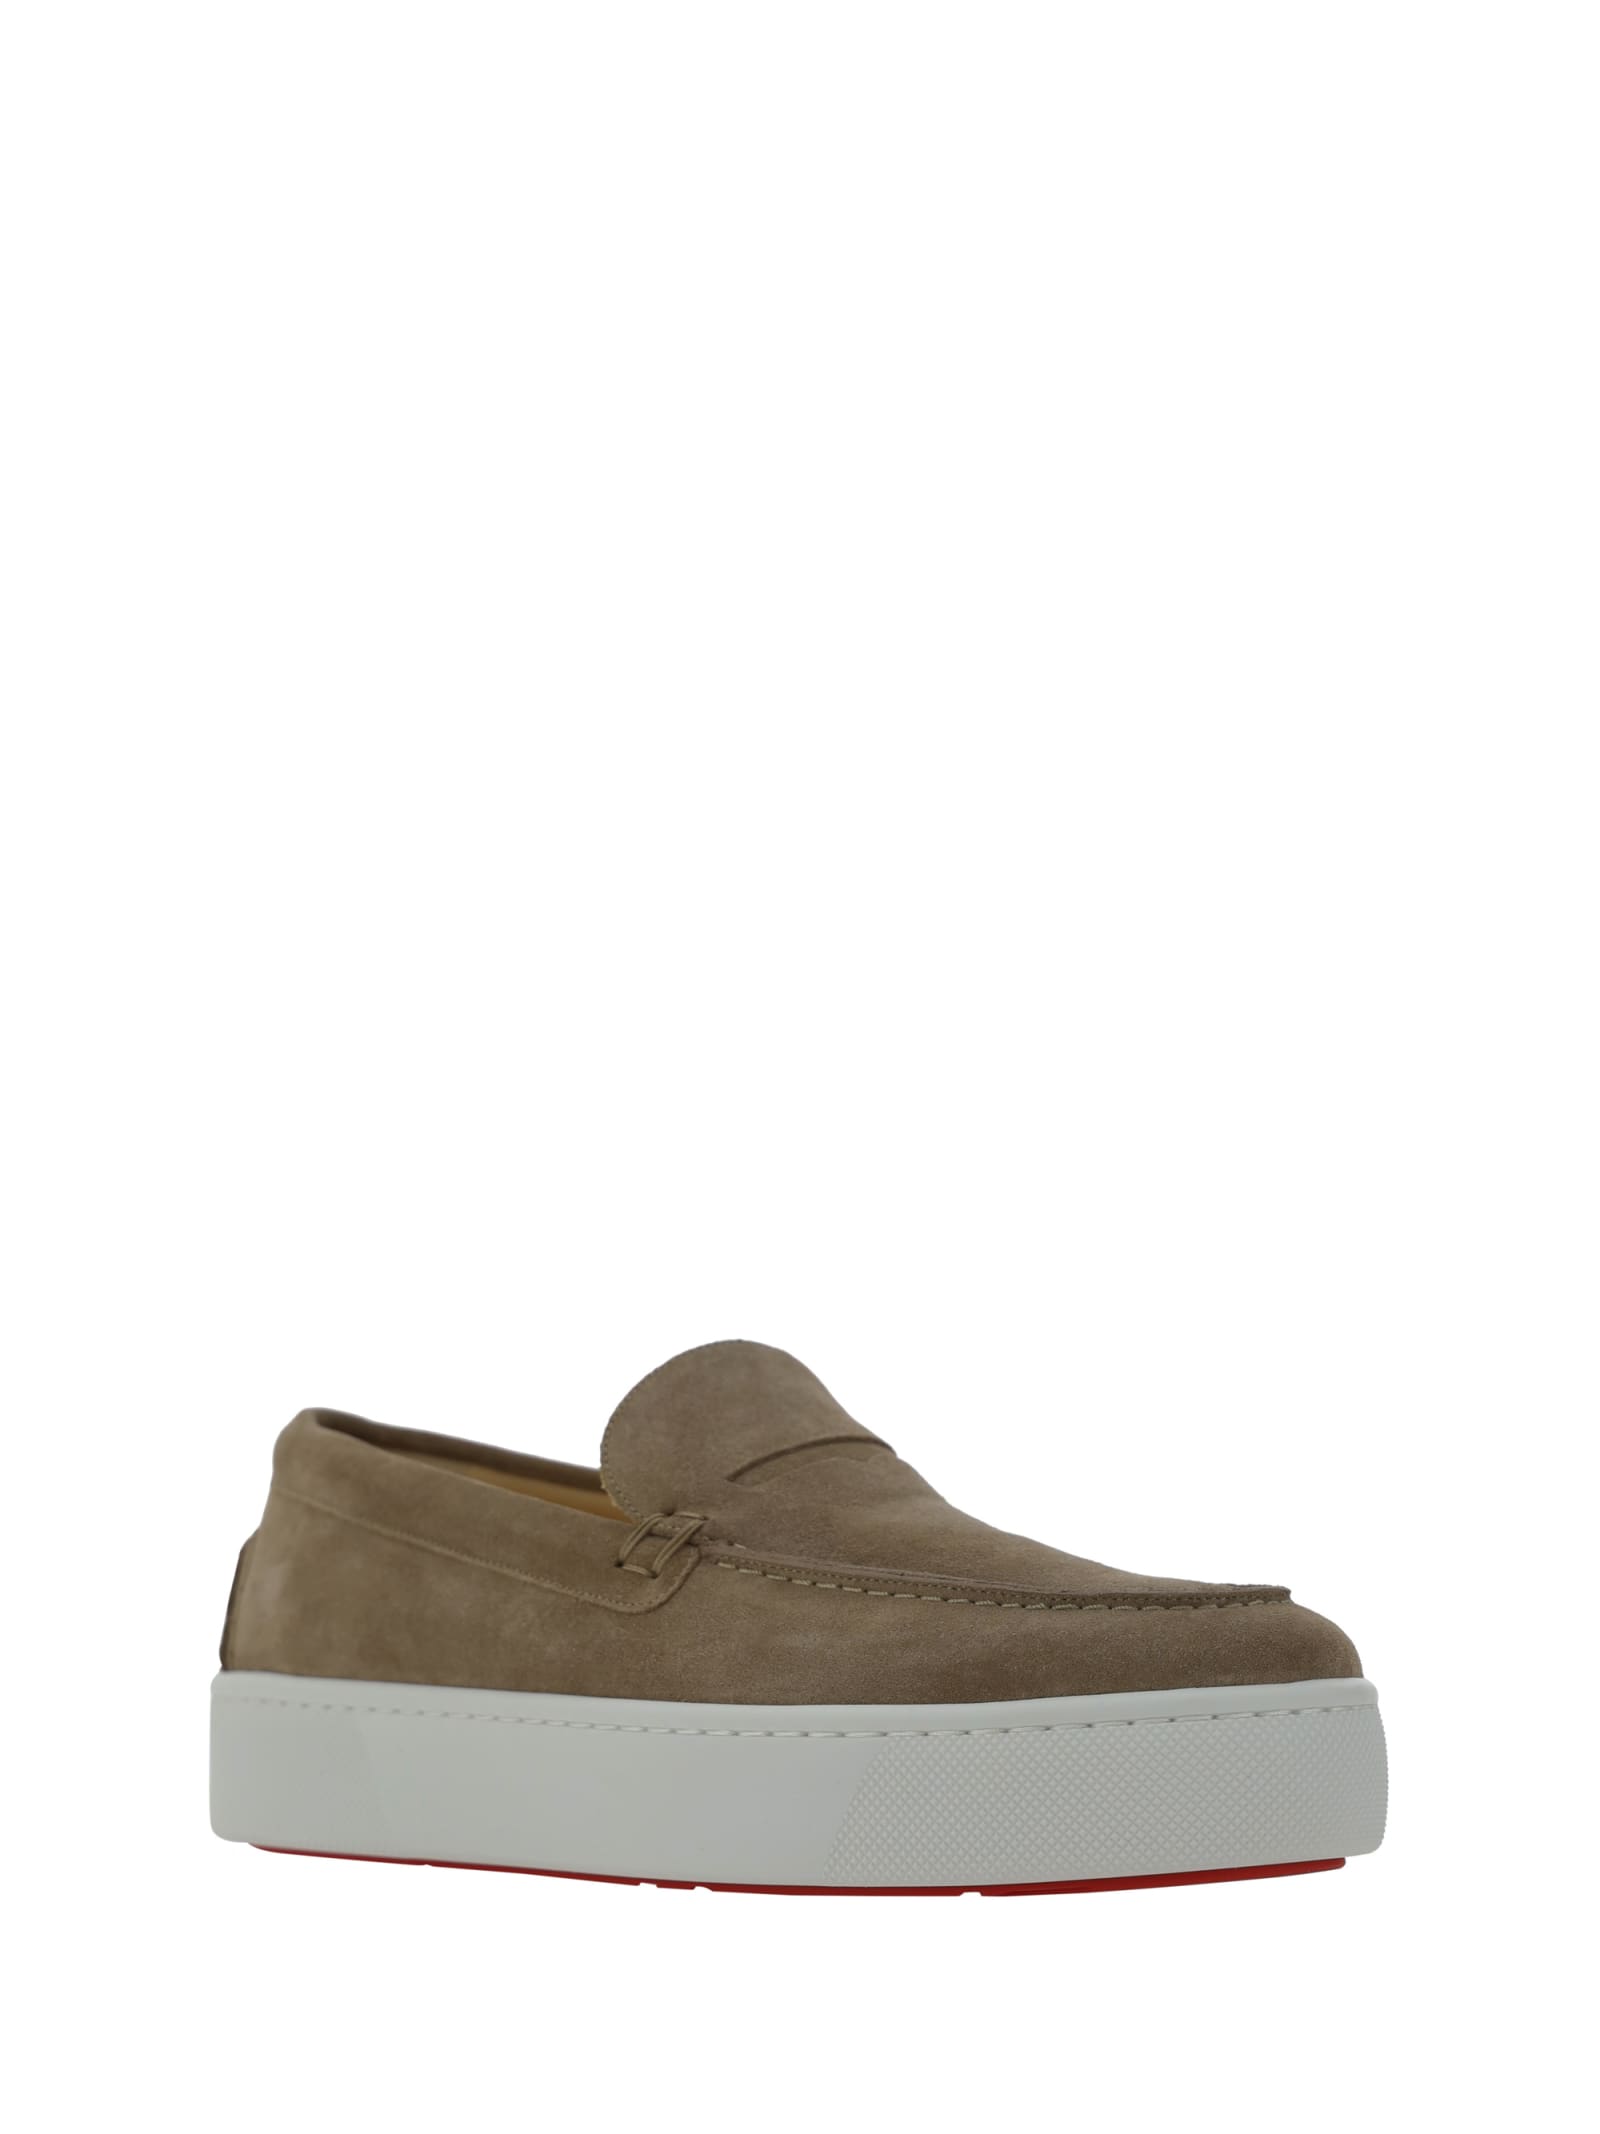 Shop Christian Louboutin Paquesboat Loafers In Saharienne